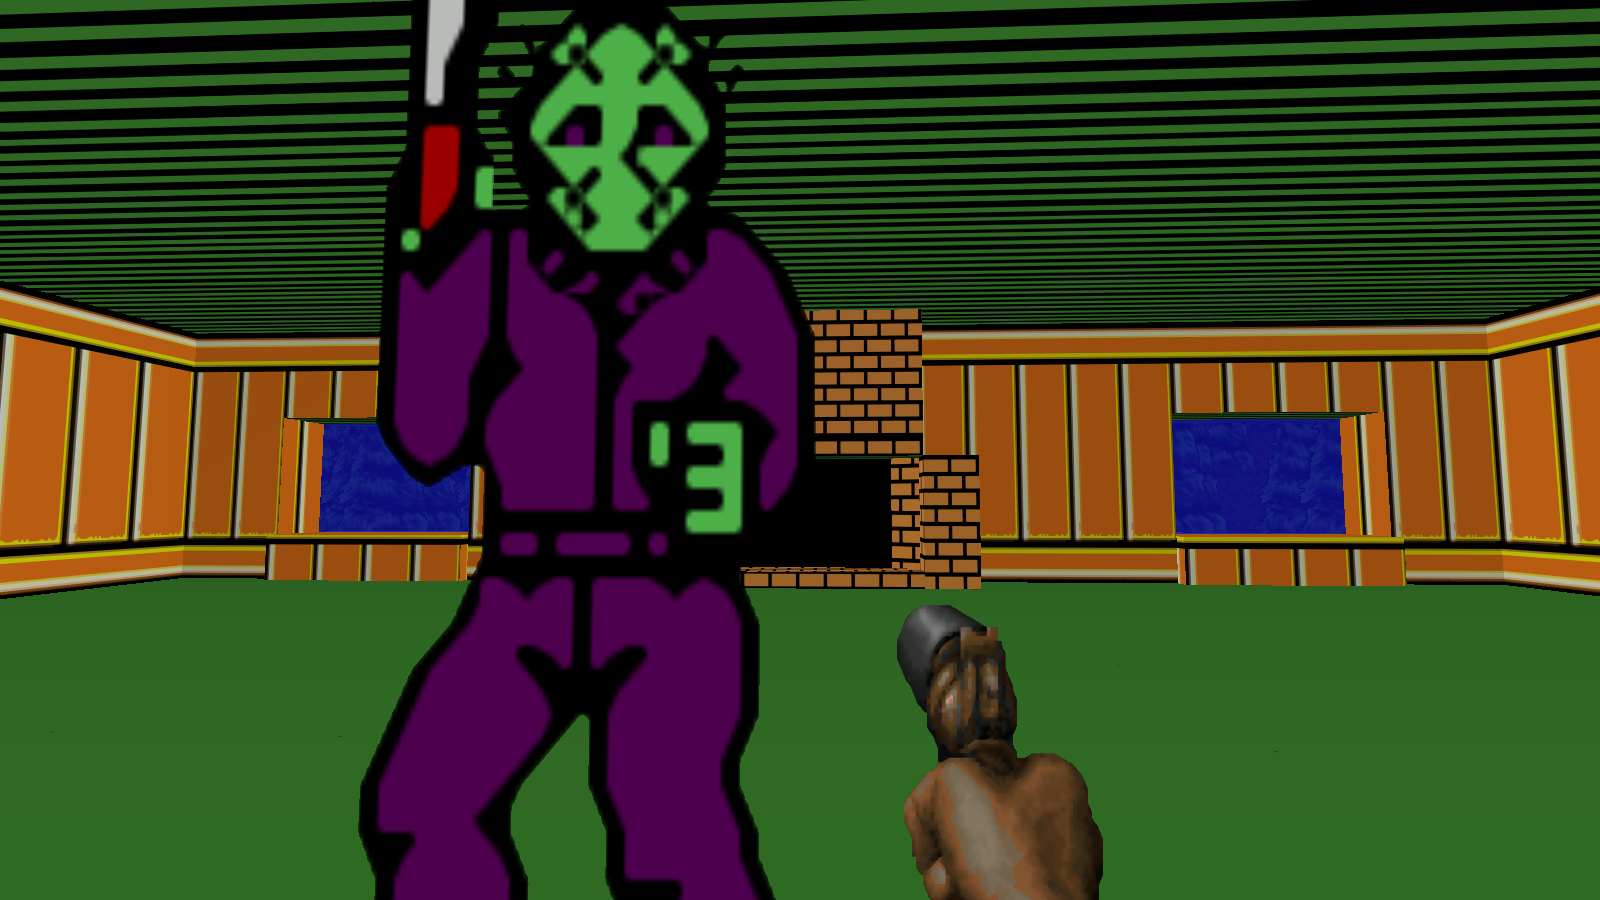 Friday The 13th - Friday The 13th The Game Nes Jason - HD Wallpaper 